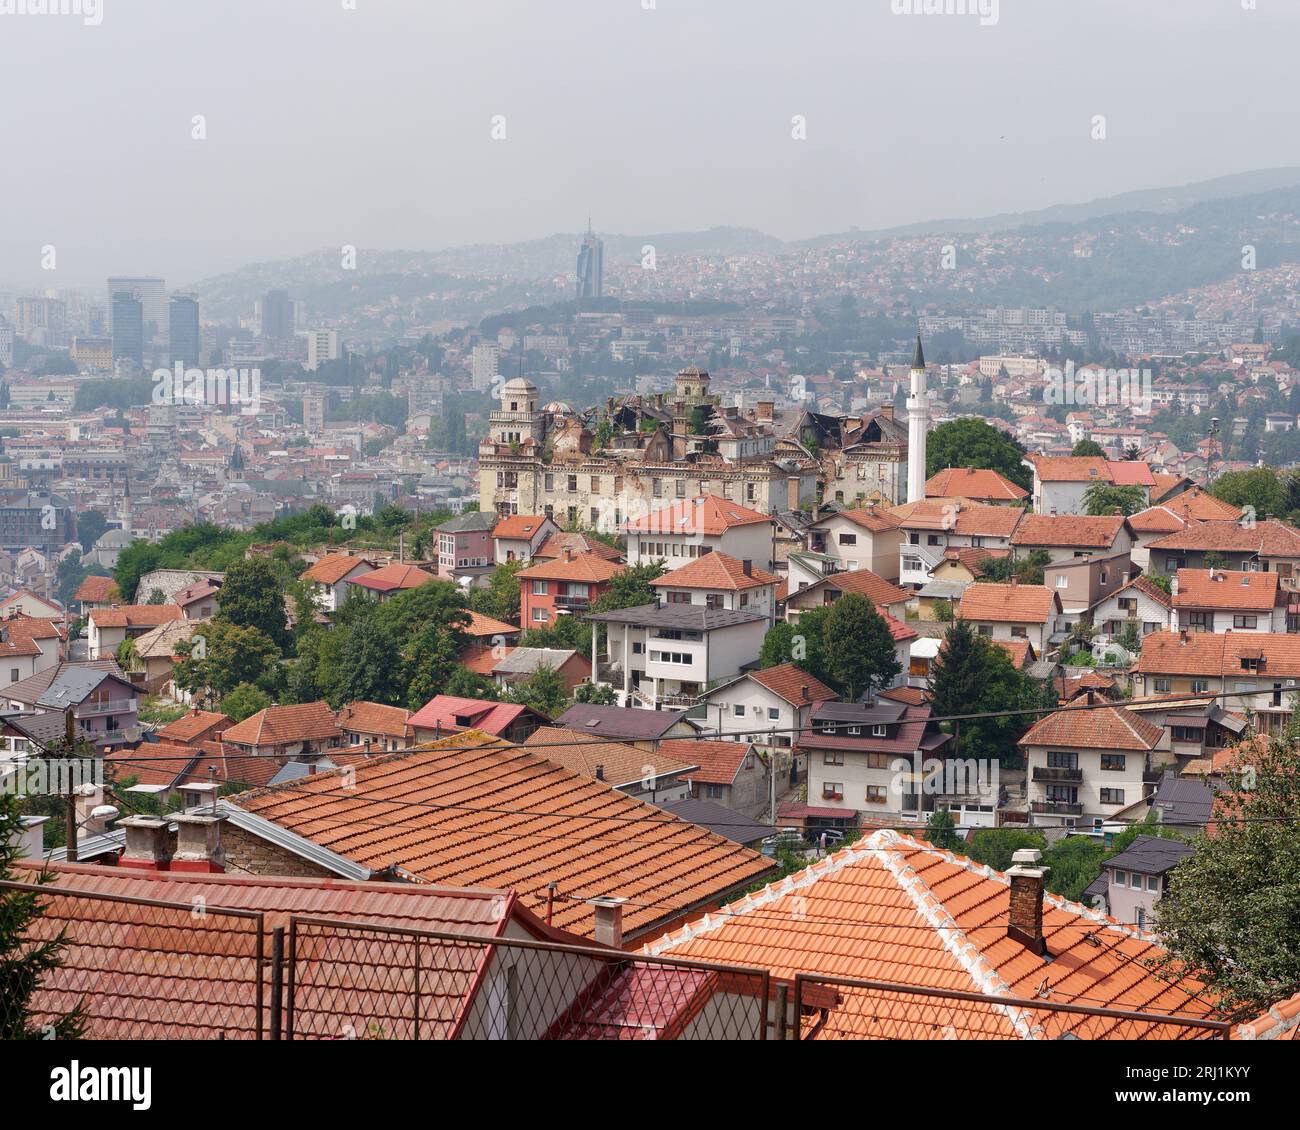 Elevated view over the rooftops in Sarajevo, Bosnia and Herzegovina, August 19,2023. Large Mansion type building with damaged roof on the hilltop. Stock Photo